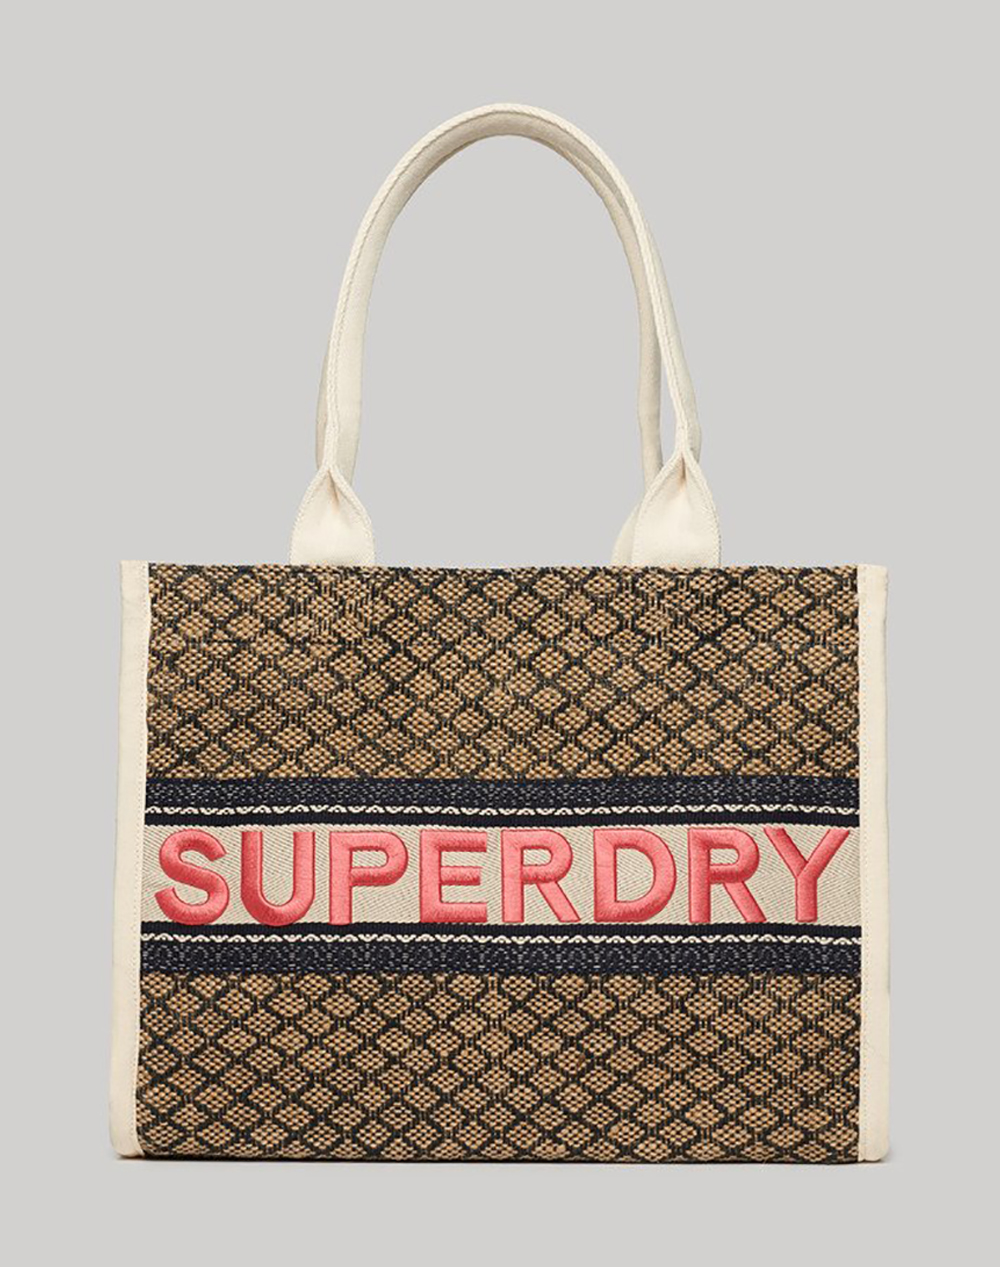 SUPERDRY D2 SDRY LUXE TOTE BAG ΤΣΑΝΤΑ ΓΥΝΑΙΚΕΙΟ (Διαστάσεις: 32 x 38 x 15 εκ) W9110381A-2HY Mixed